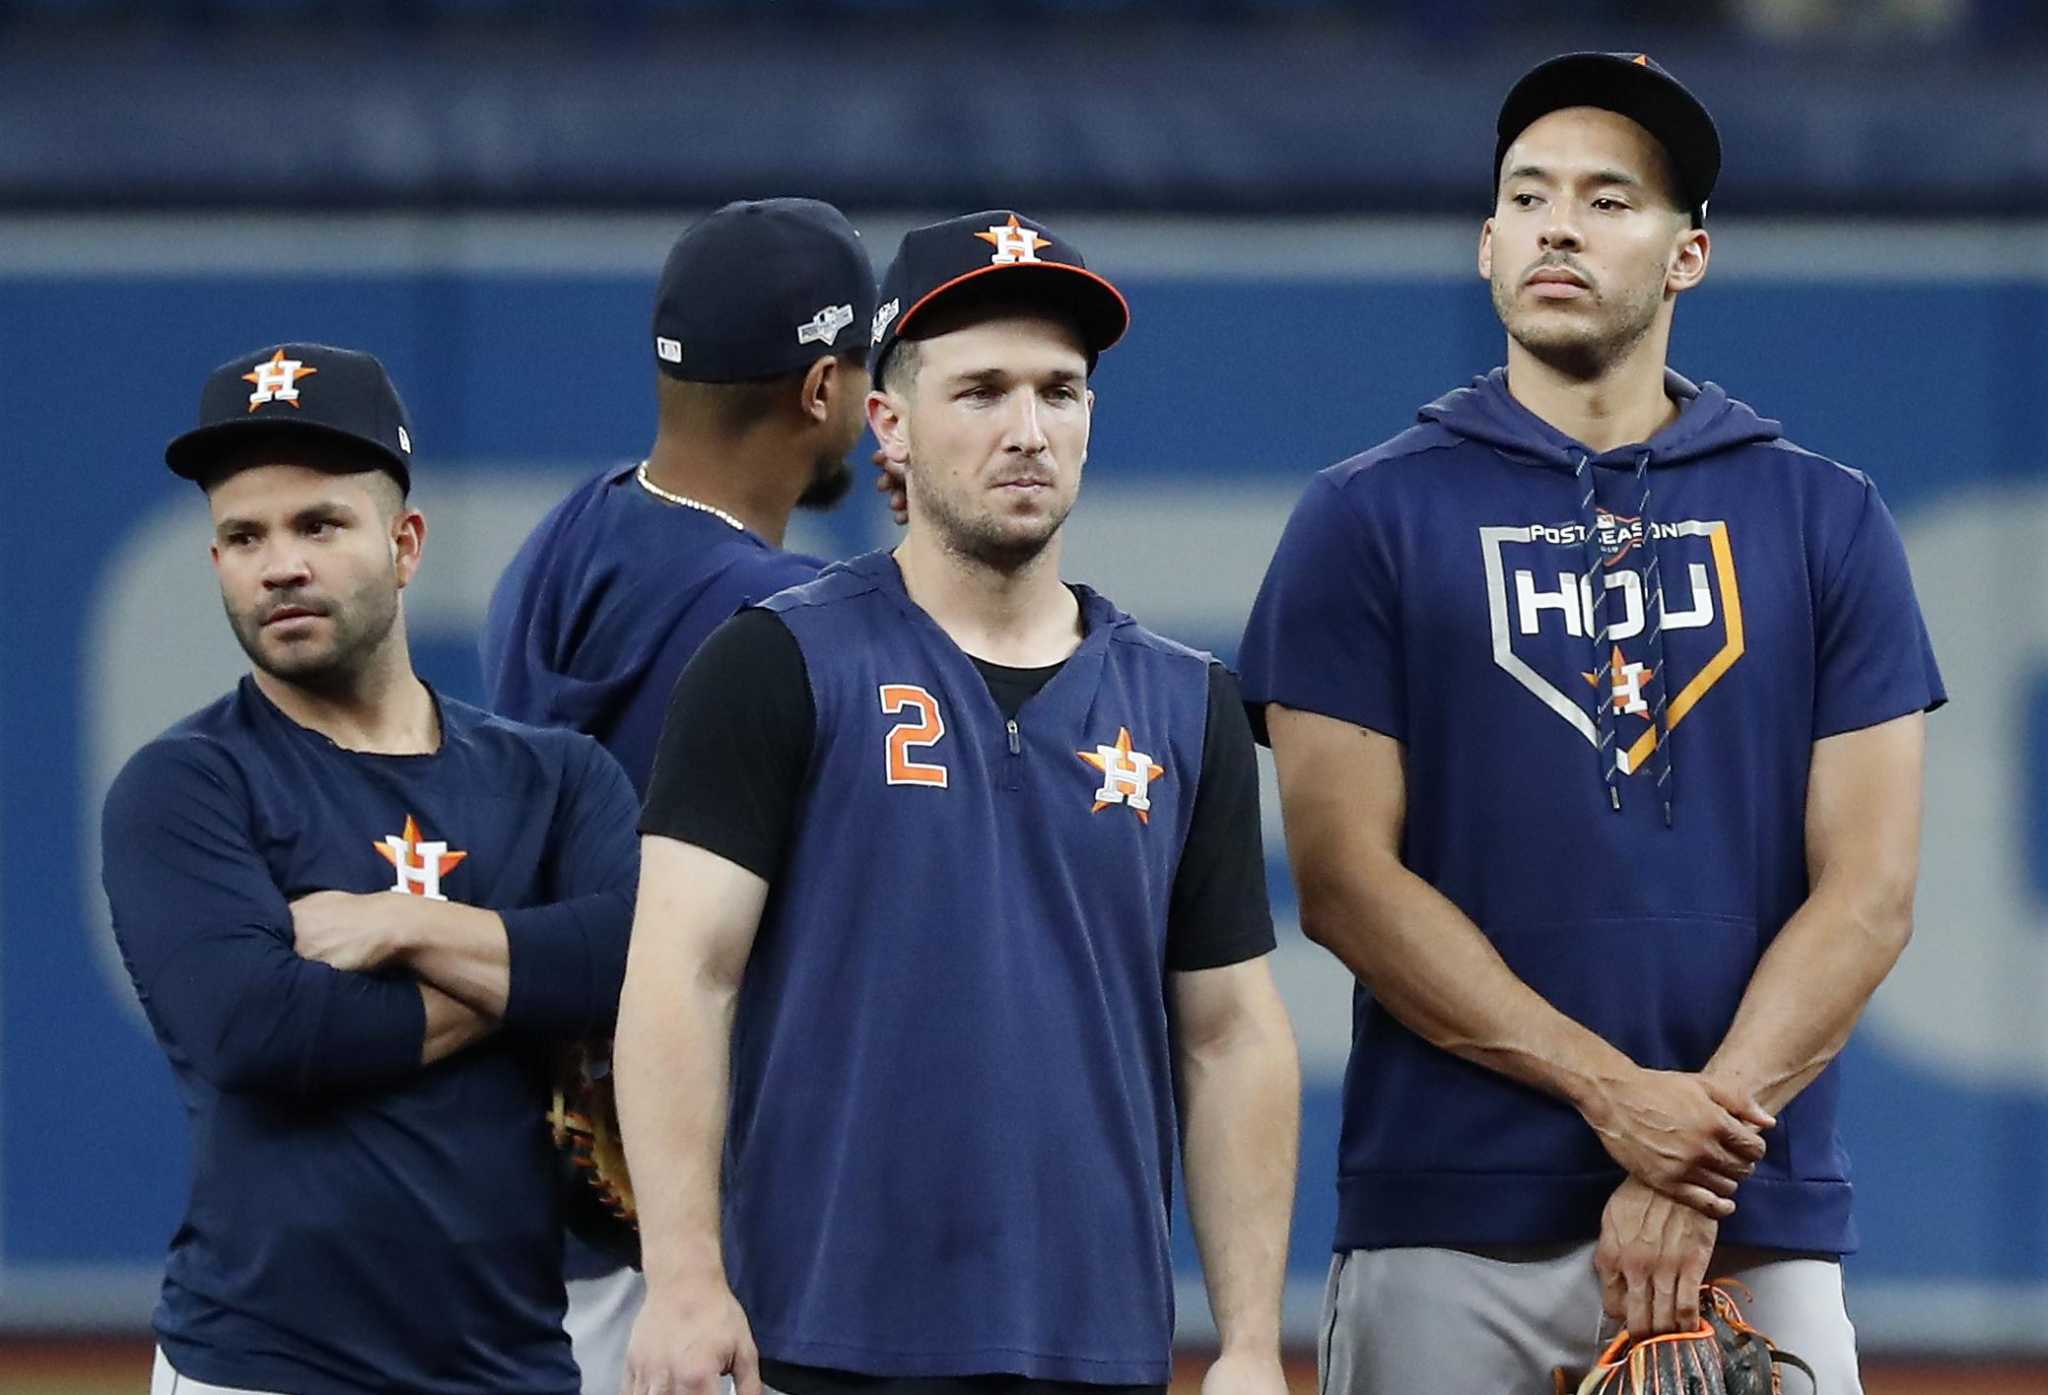 Astros' Jose Altuve nicked by pitch, stars booed in spring training